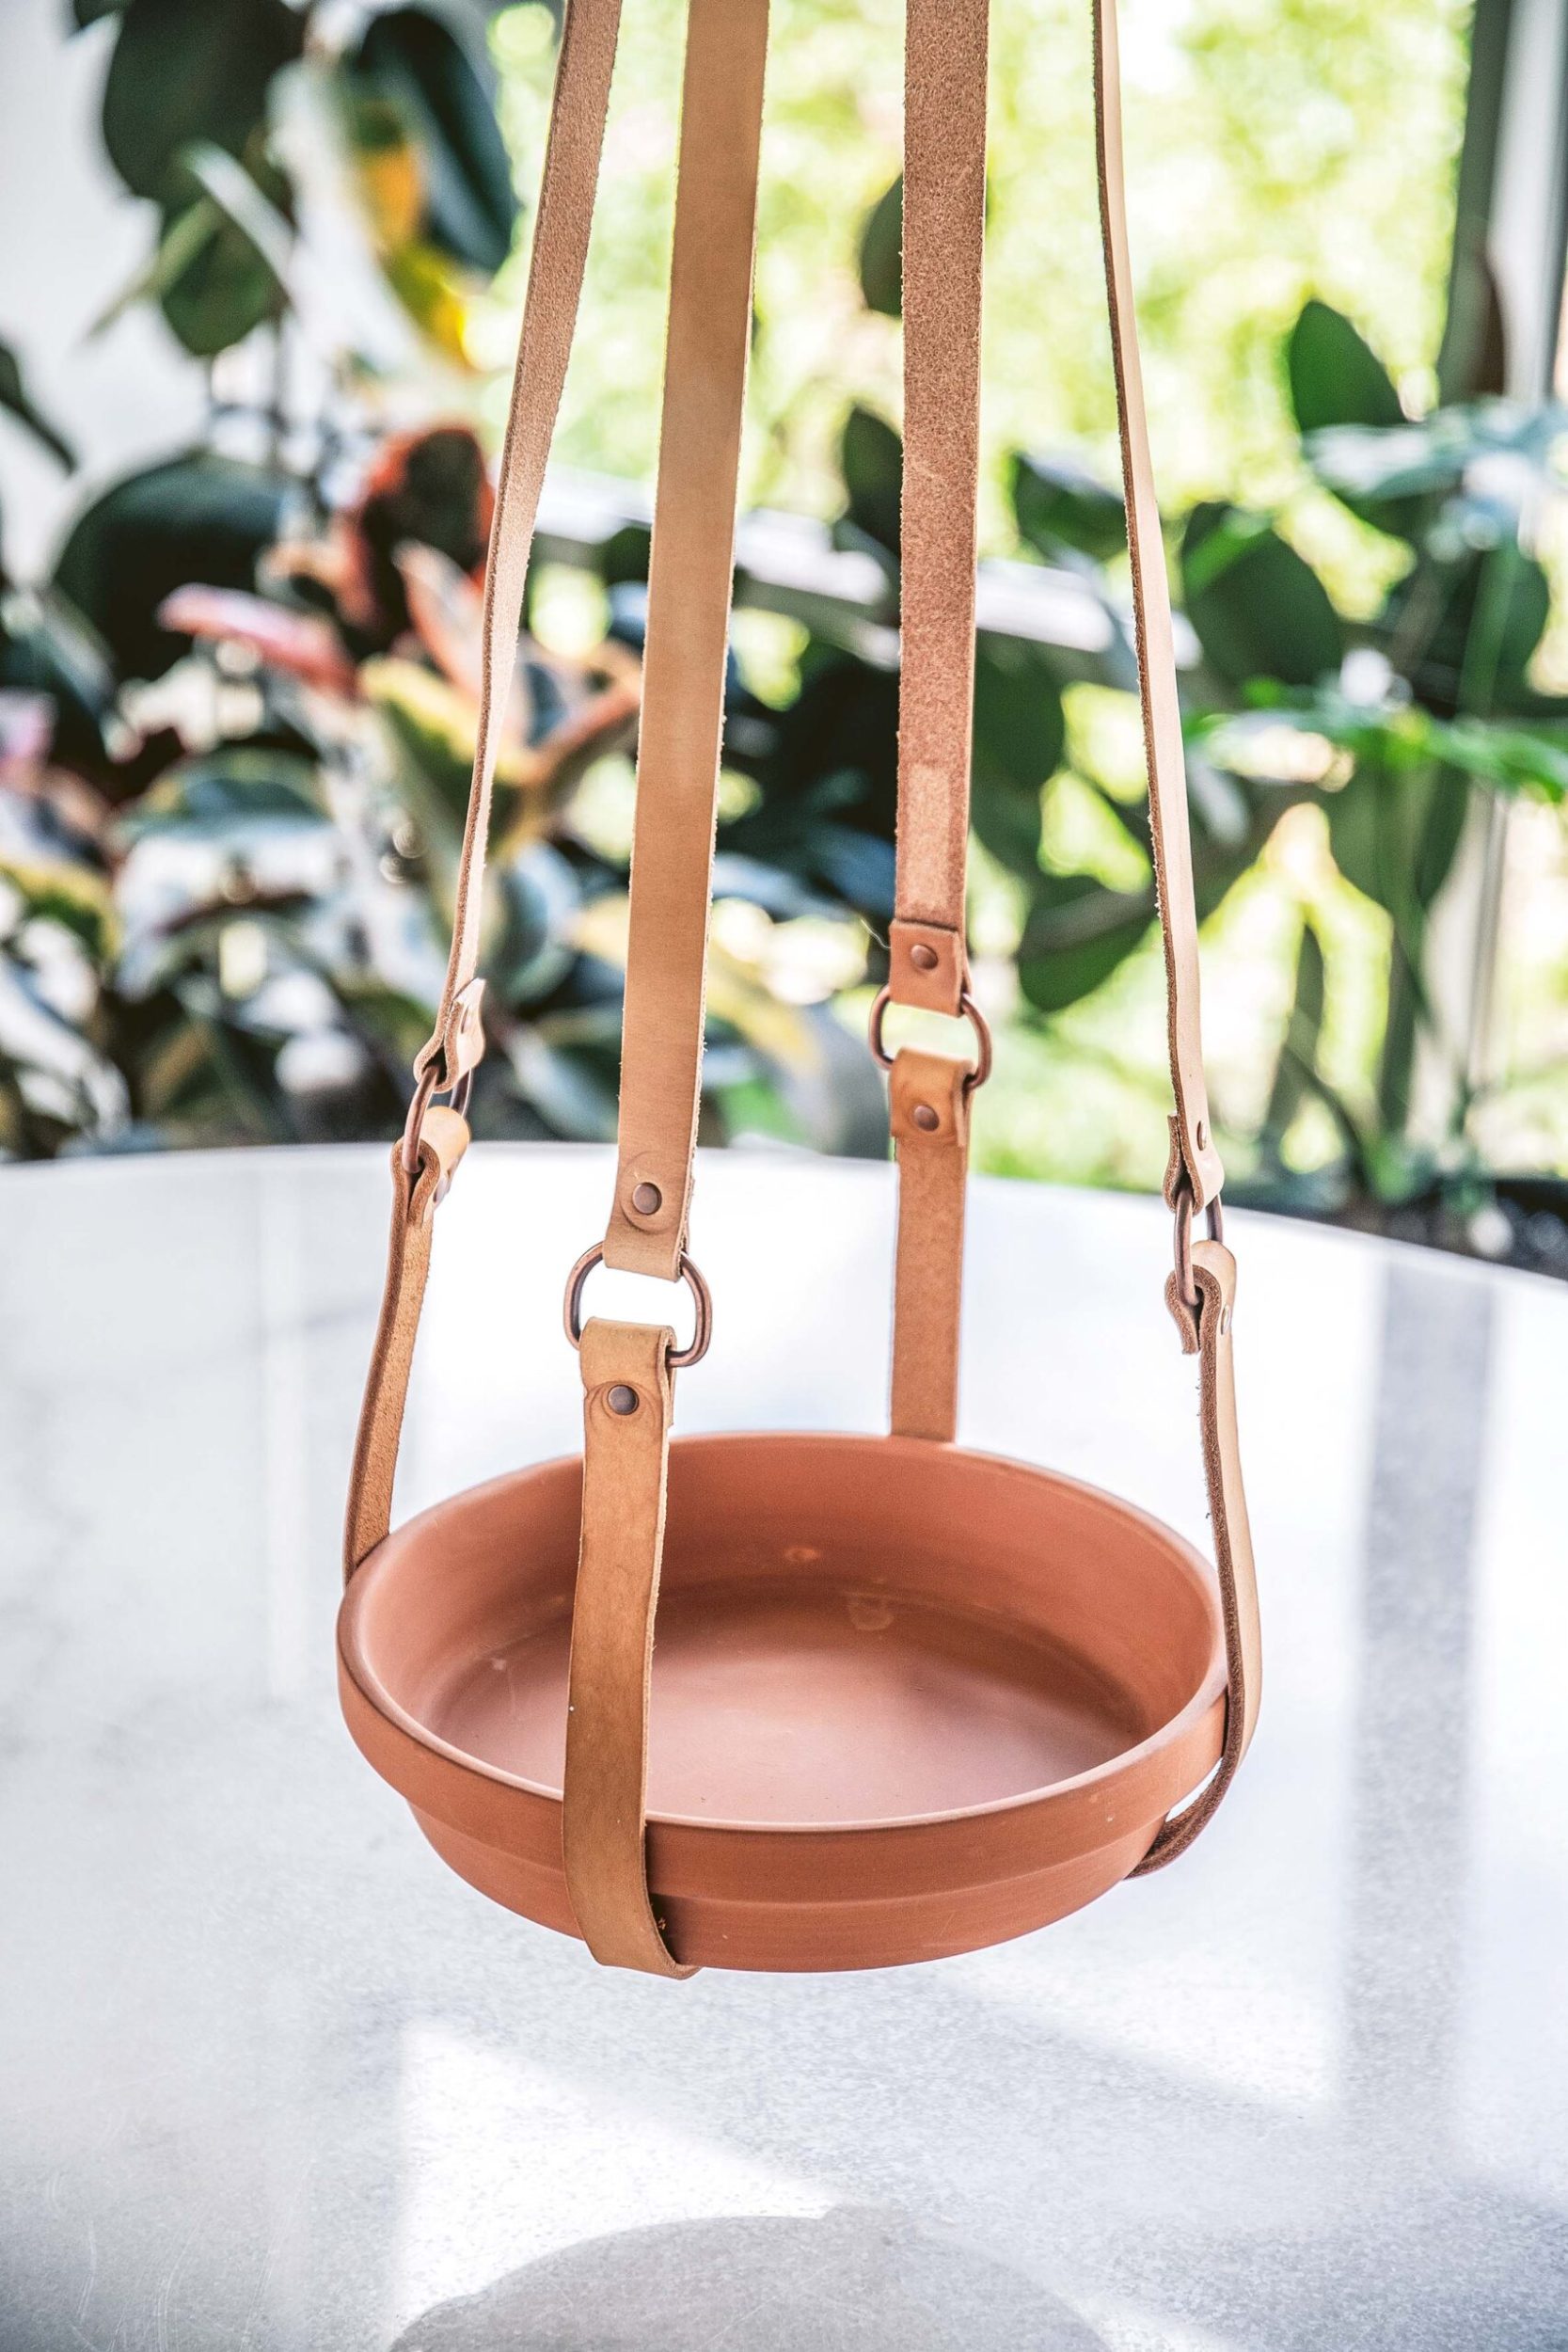 Hanging planter with leather straps and ceramic plate